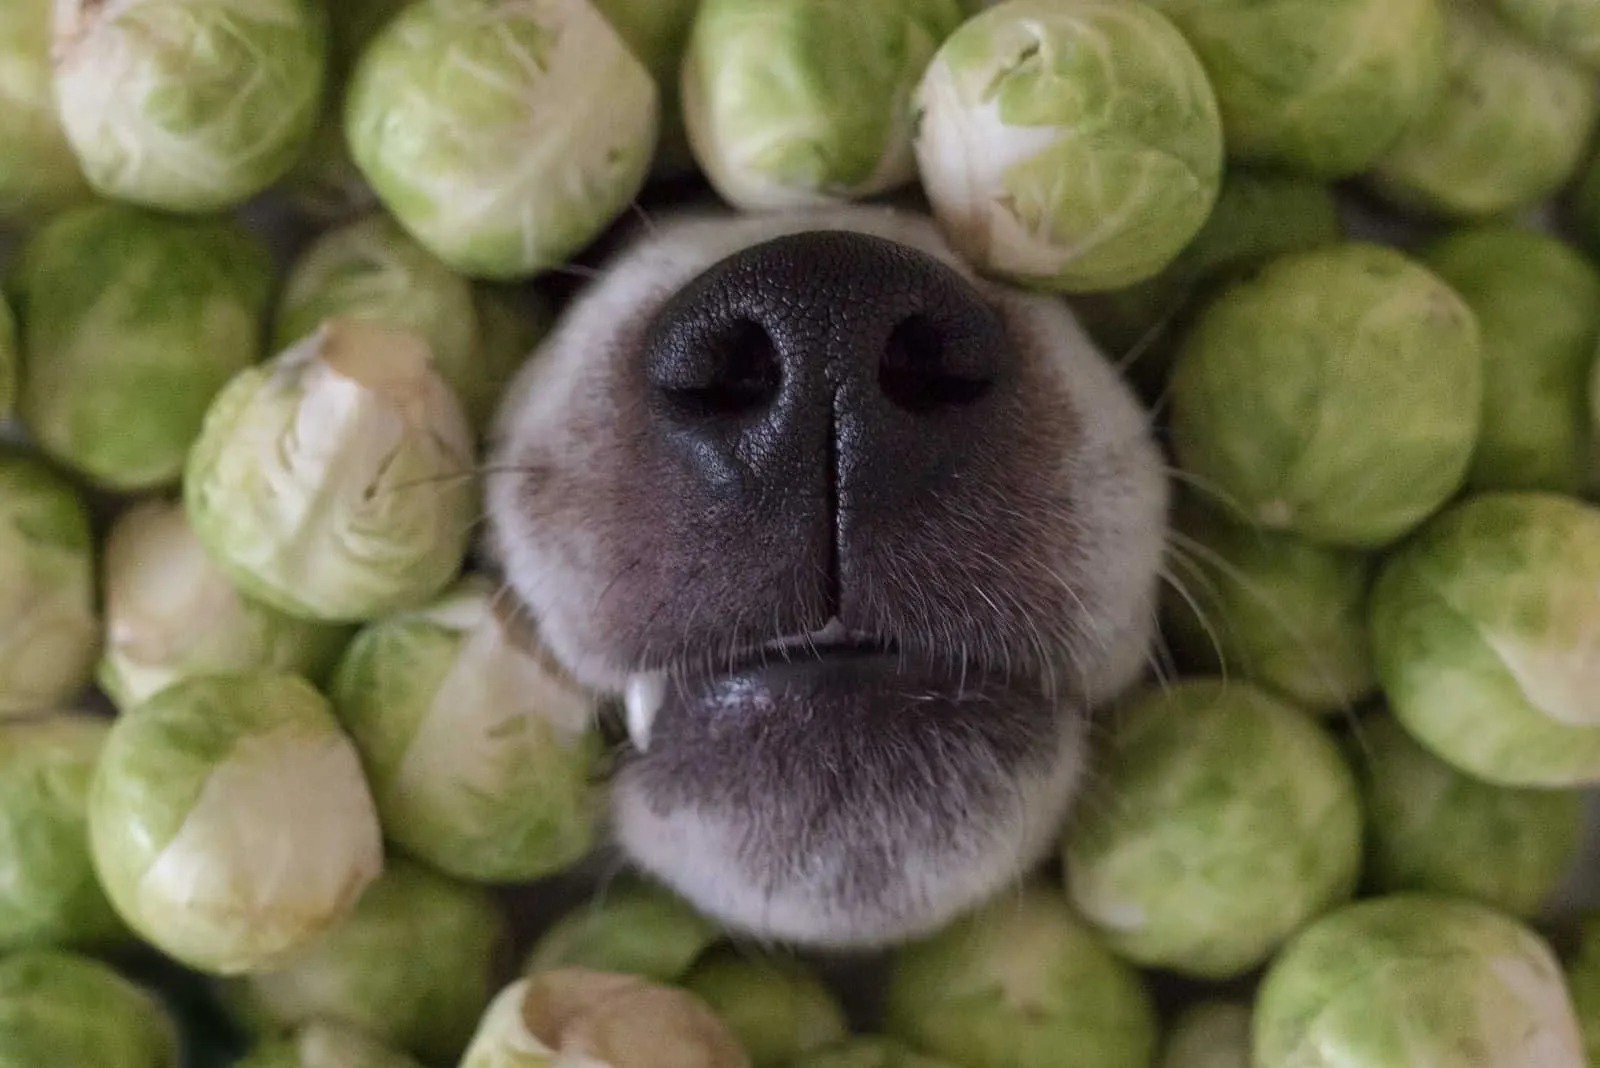 Dangerous Or Delicious? Find Out If Dogs Can Eat Brussel Sprouts!